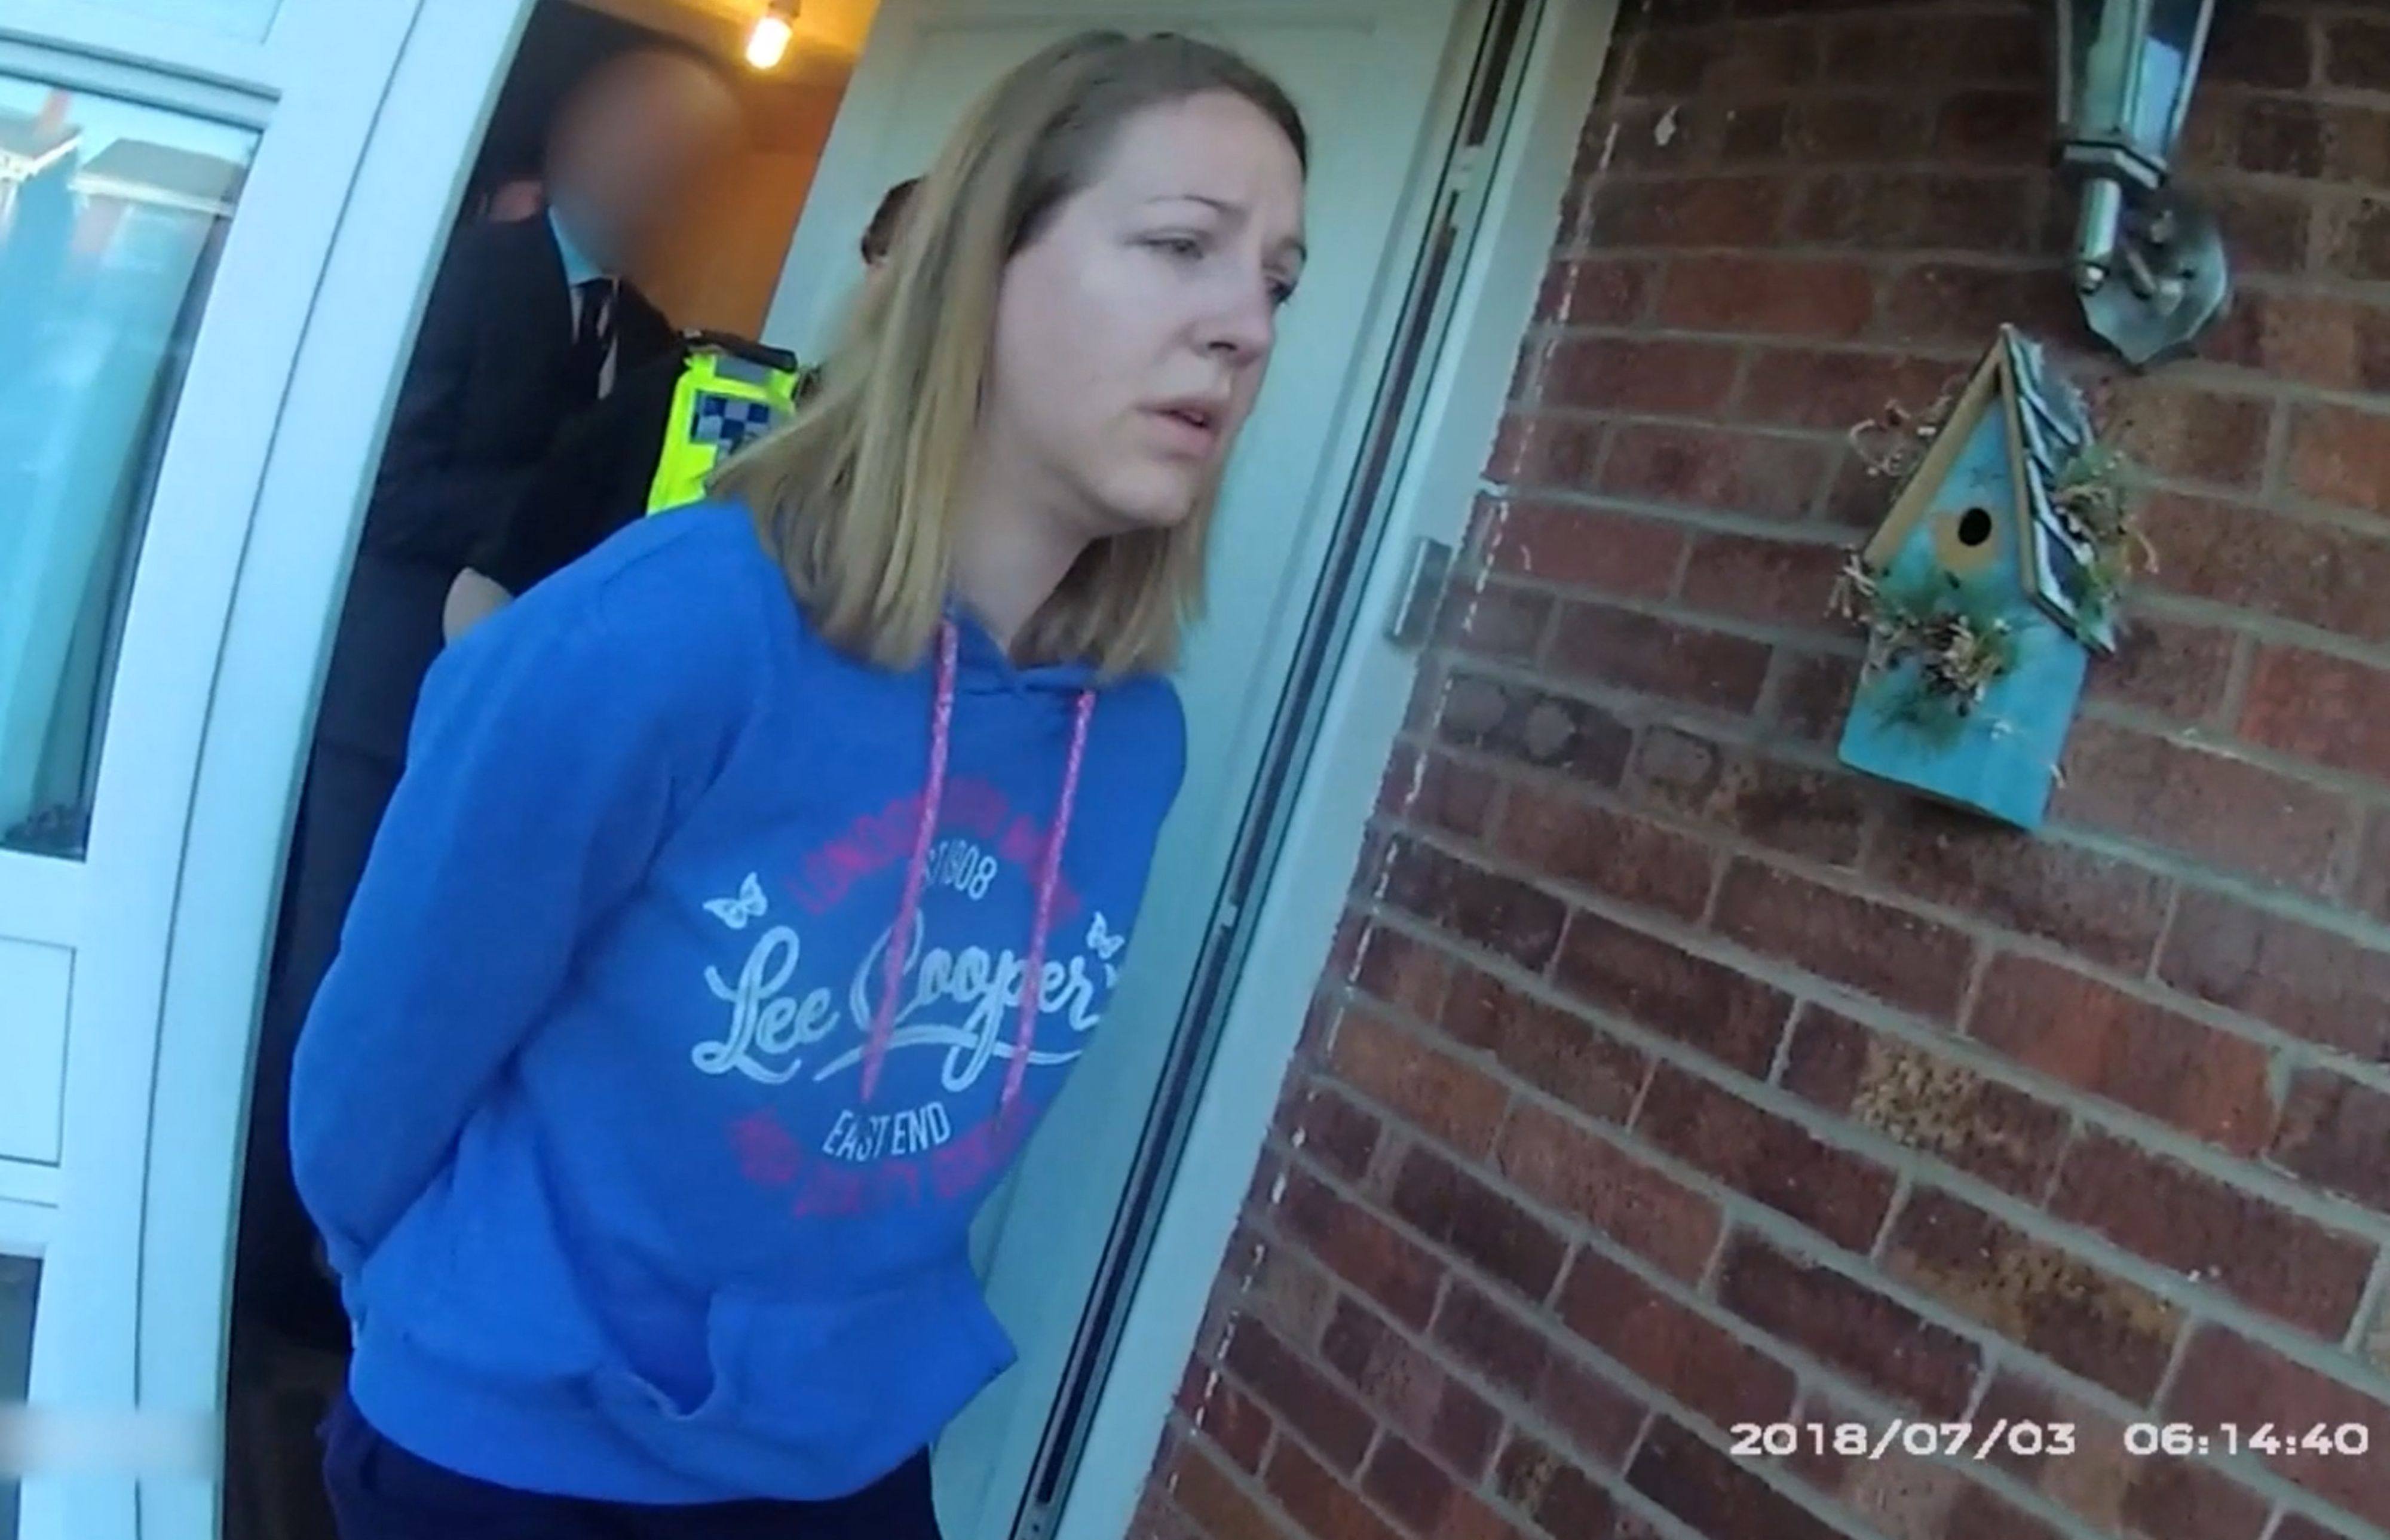 Police bodycam footage shows  Lucy Letby being arrested at her home in Chester, England in 2018. Photo: Cheshire Constabulary / AFP